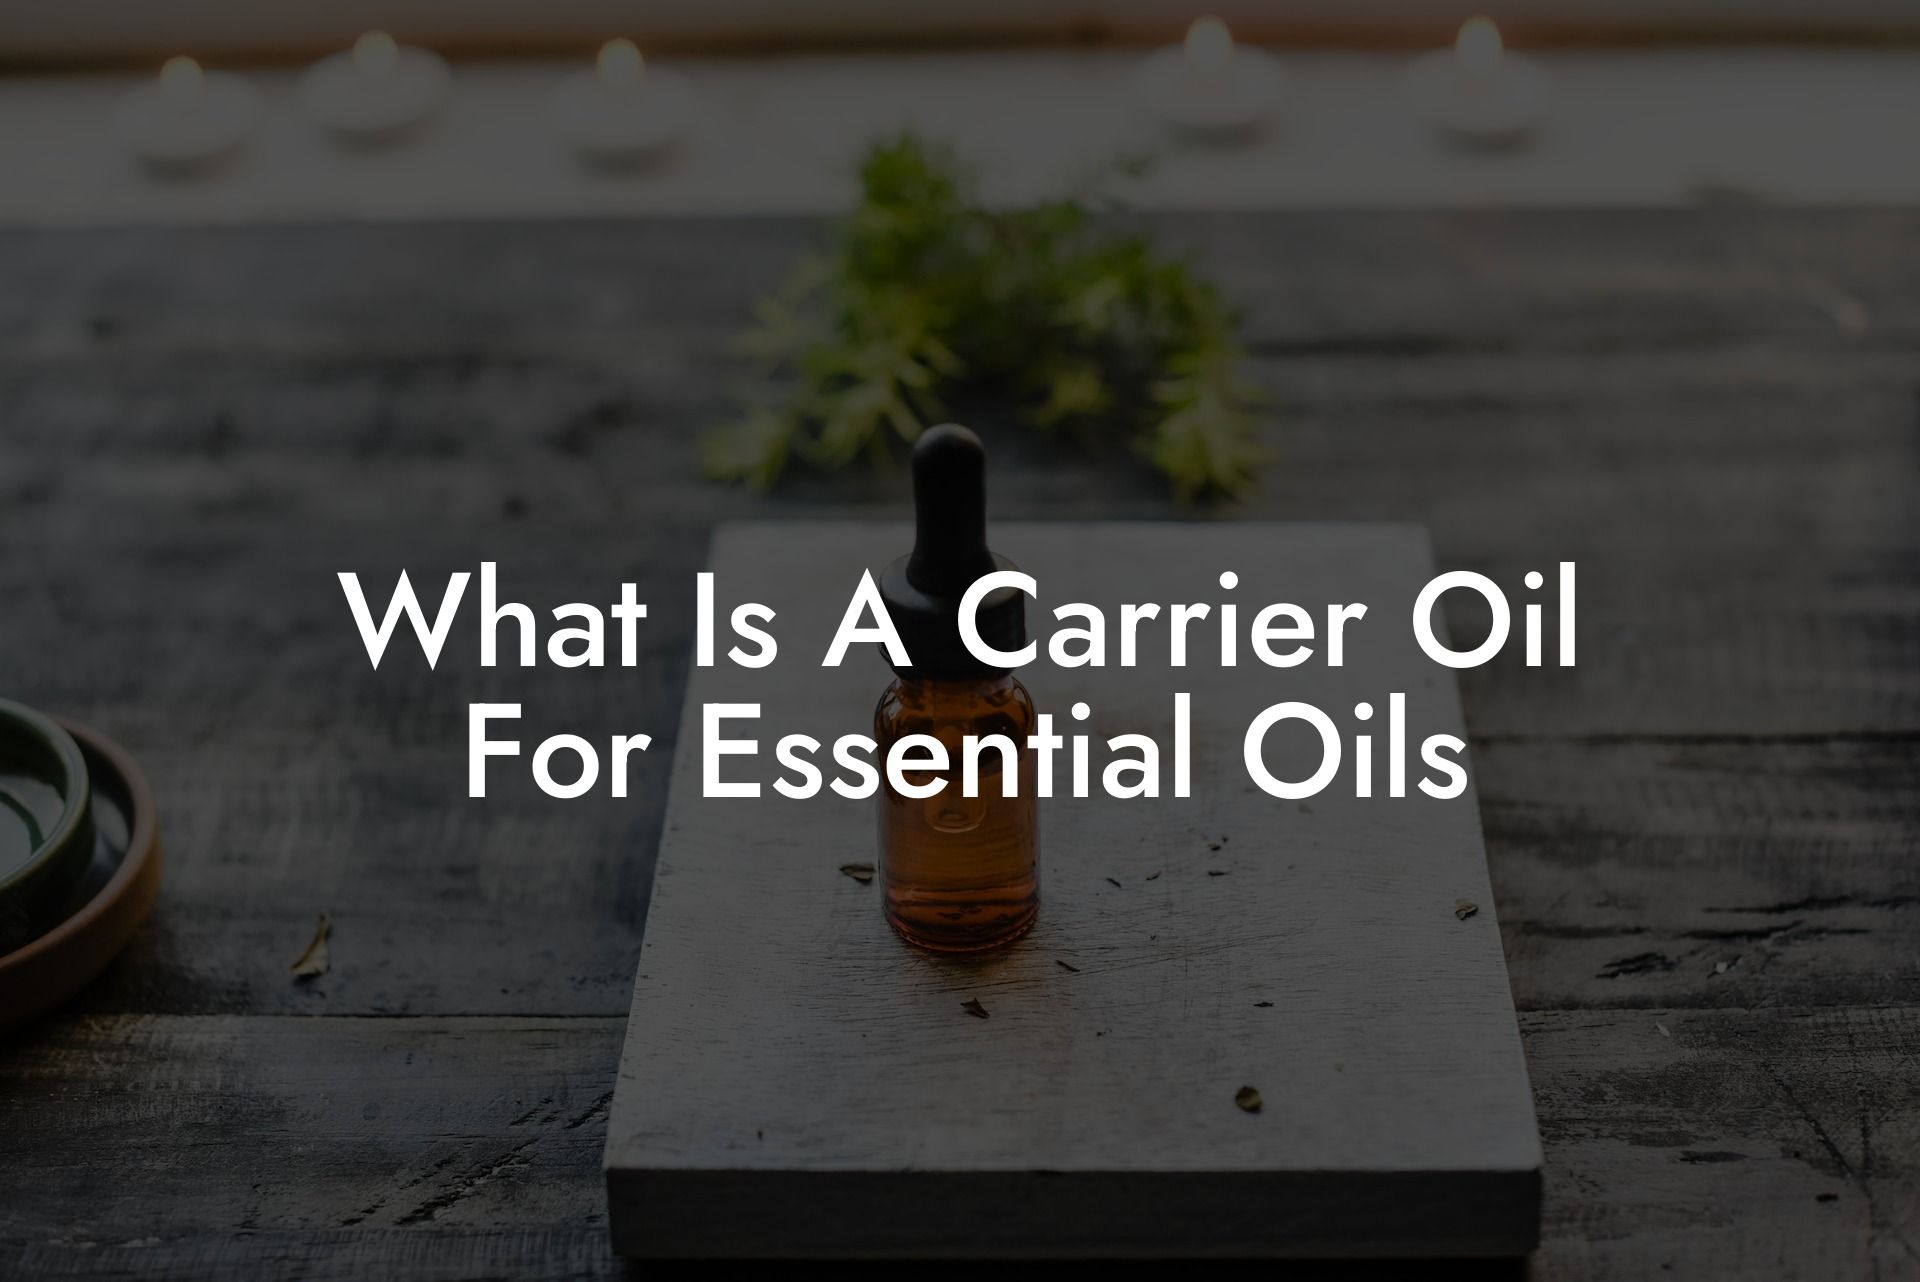 What Is A Carrier Oil For Essential Oils